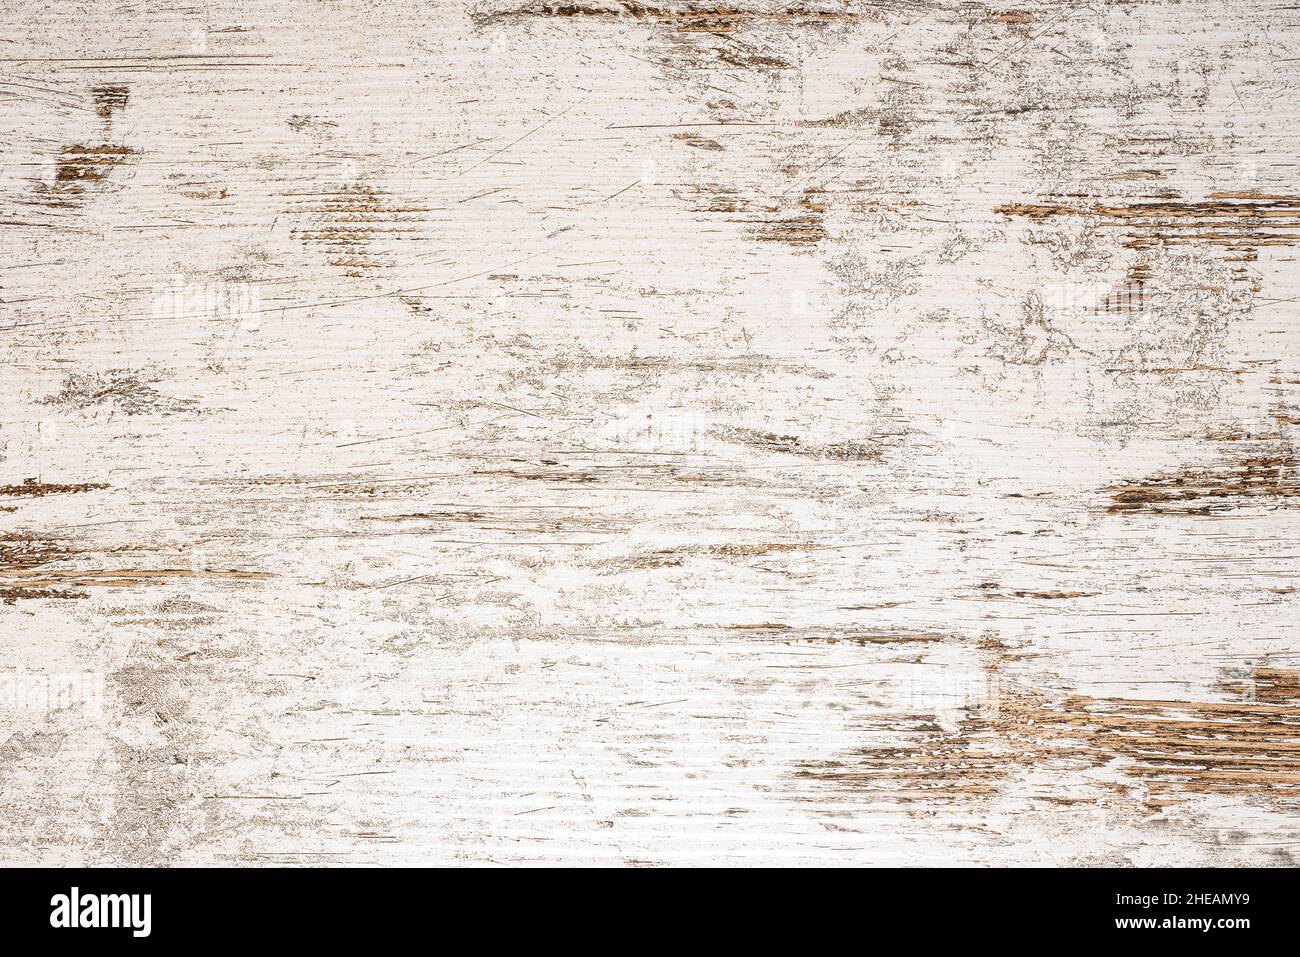 Old wooden shabby chic background Stock Photo